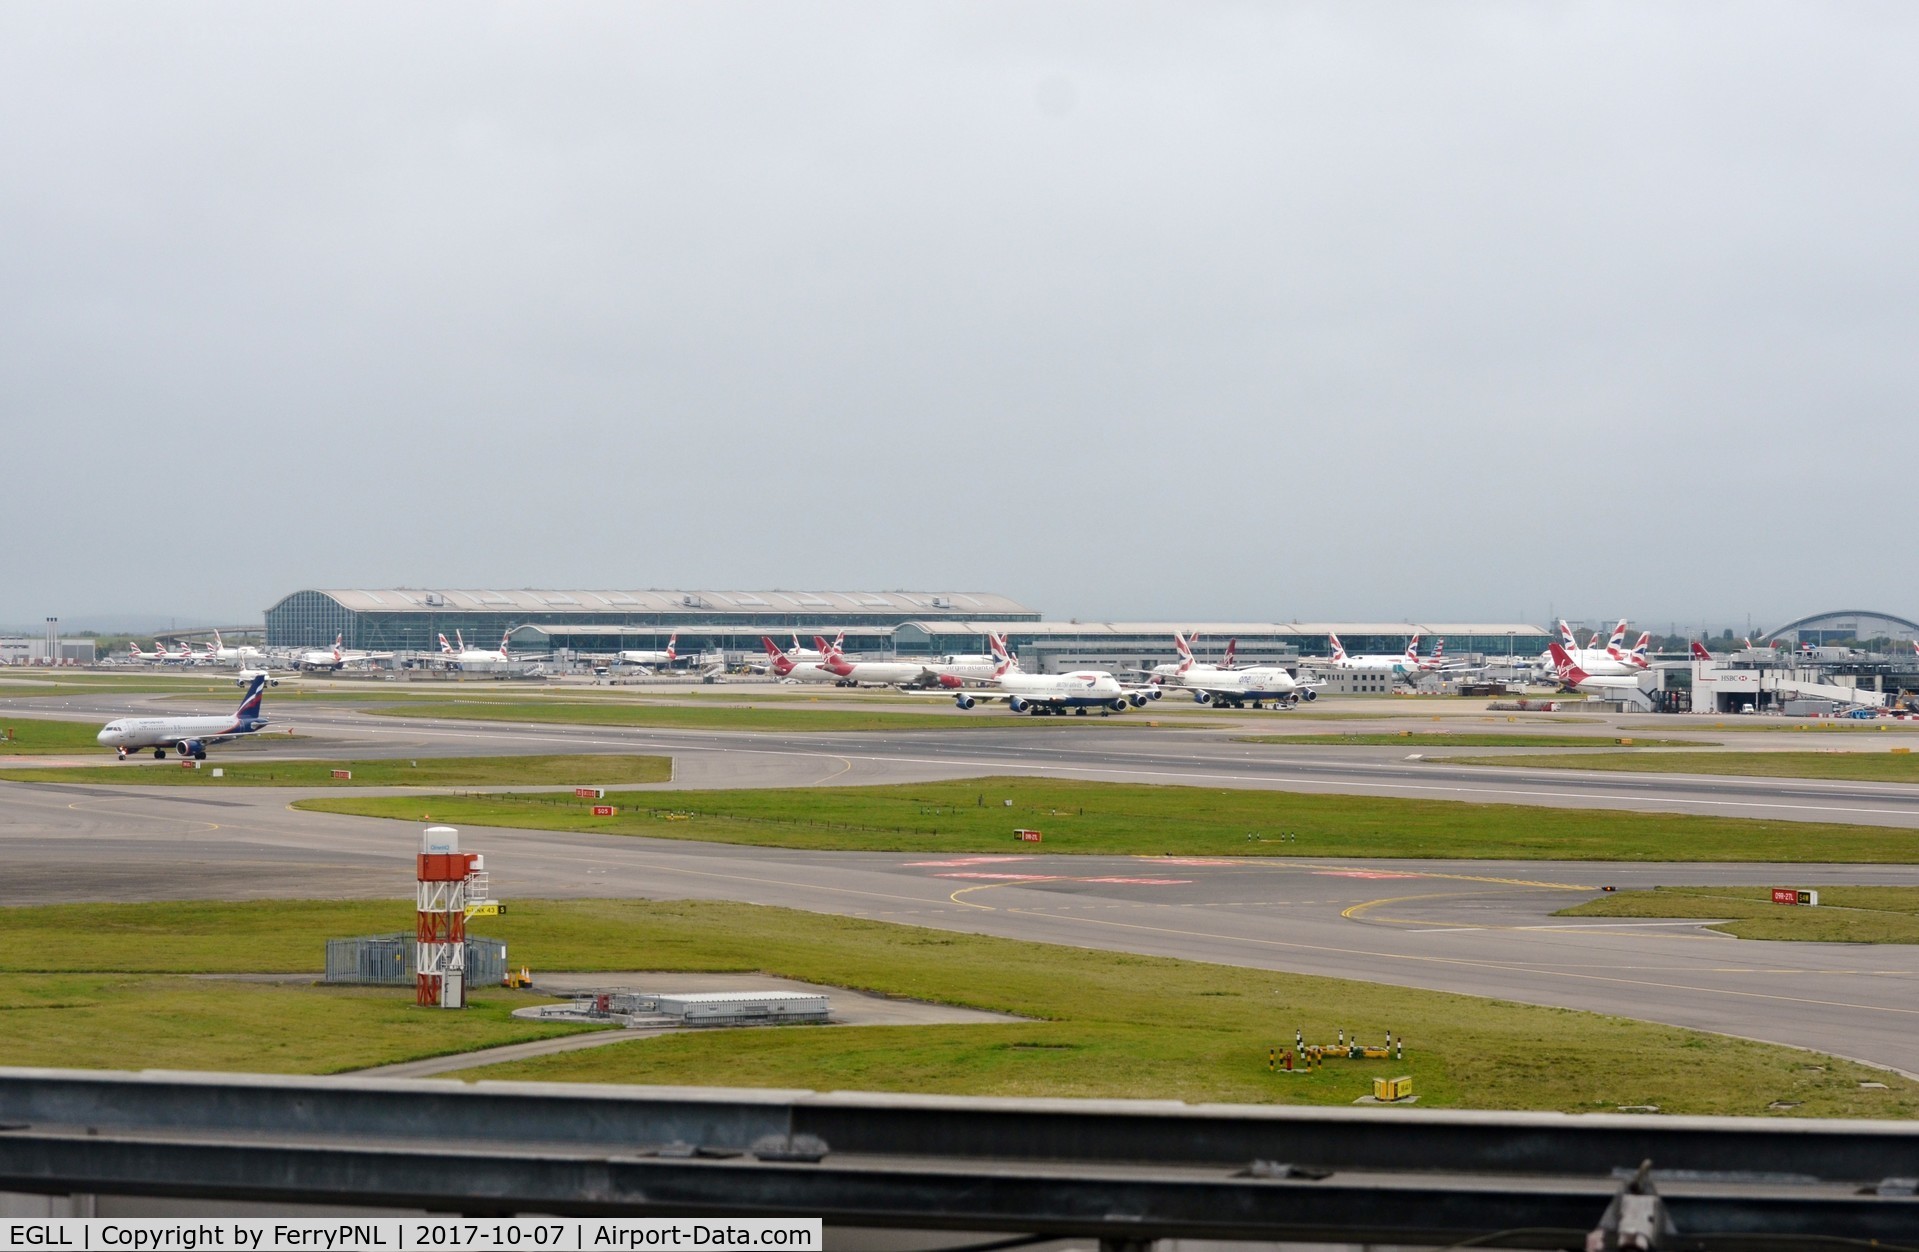 London Heathrow Airport, London, England United Kingdom (EGLL) - View toward Terminal 5 in the distance with part of T3 to the right.